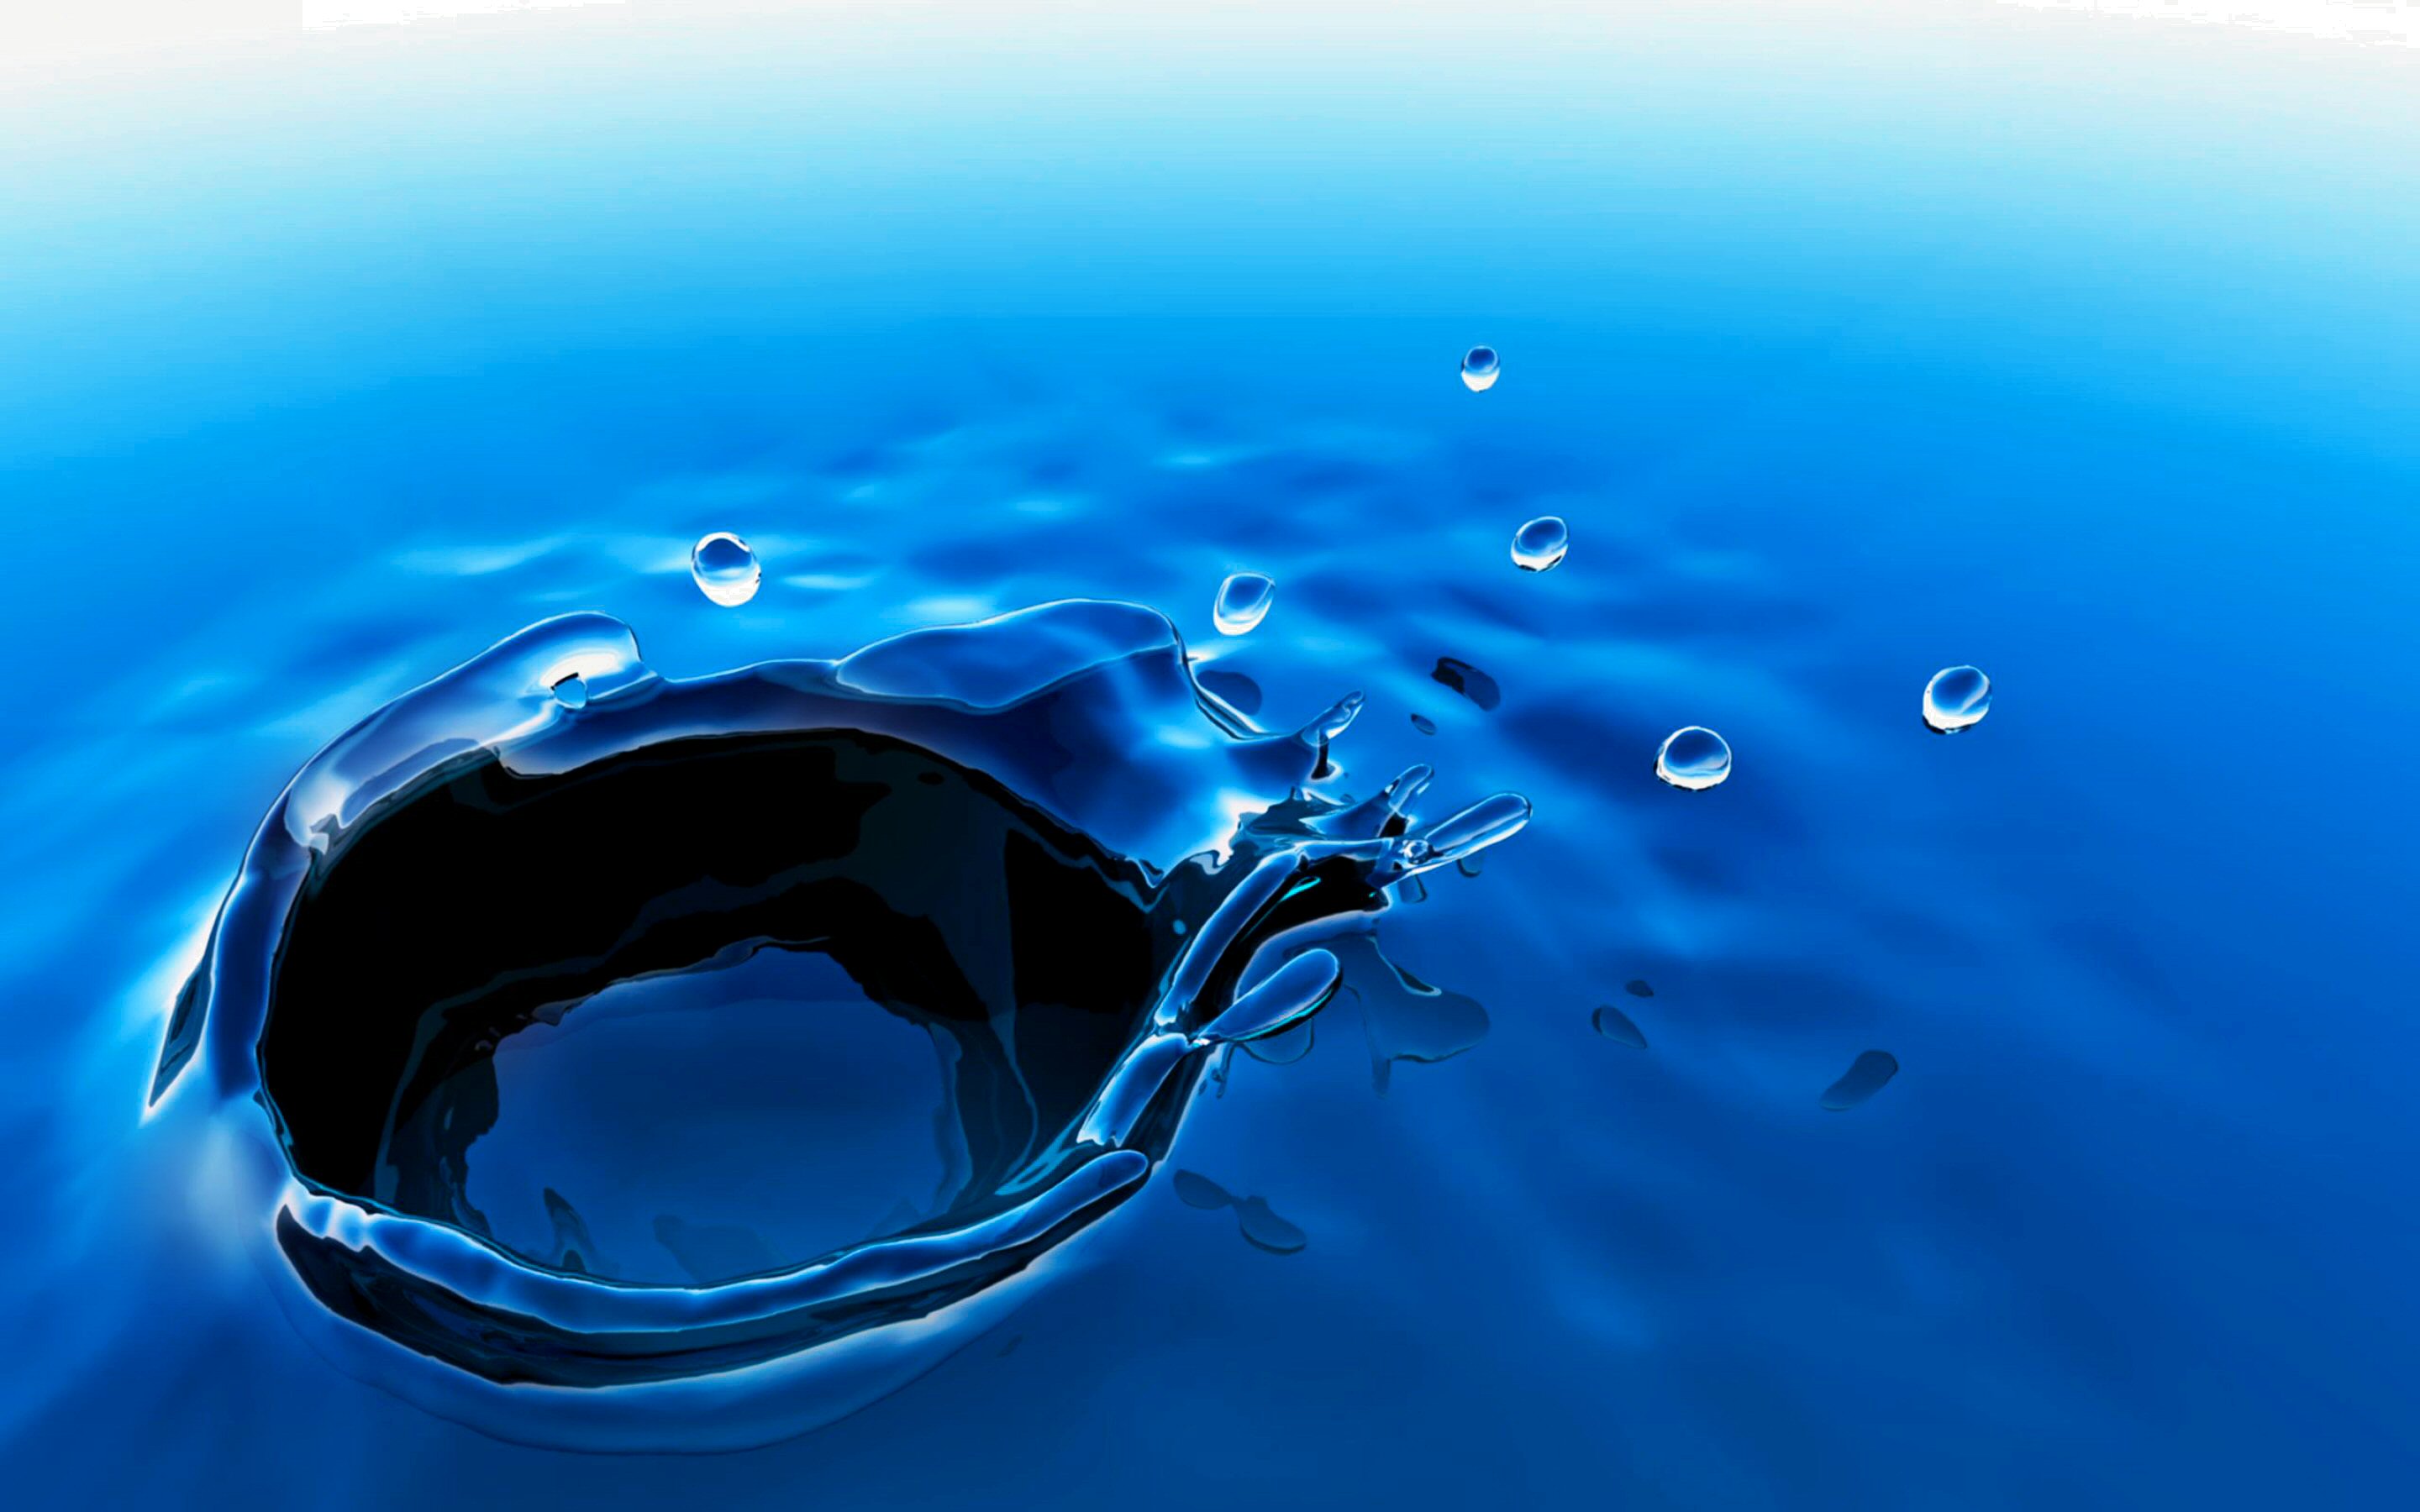 210+ Water Drop HD Wallpapers and Backgrounds